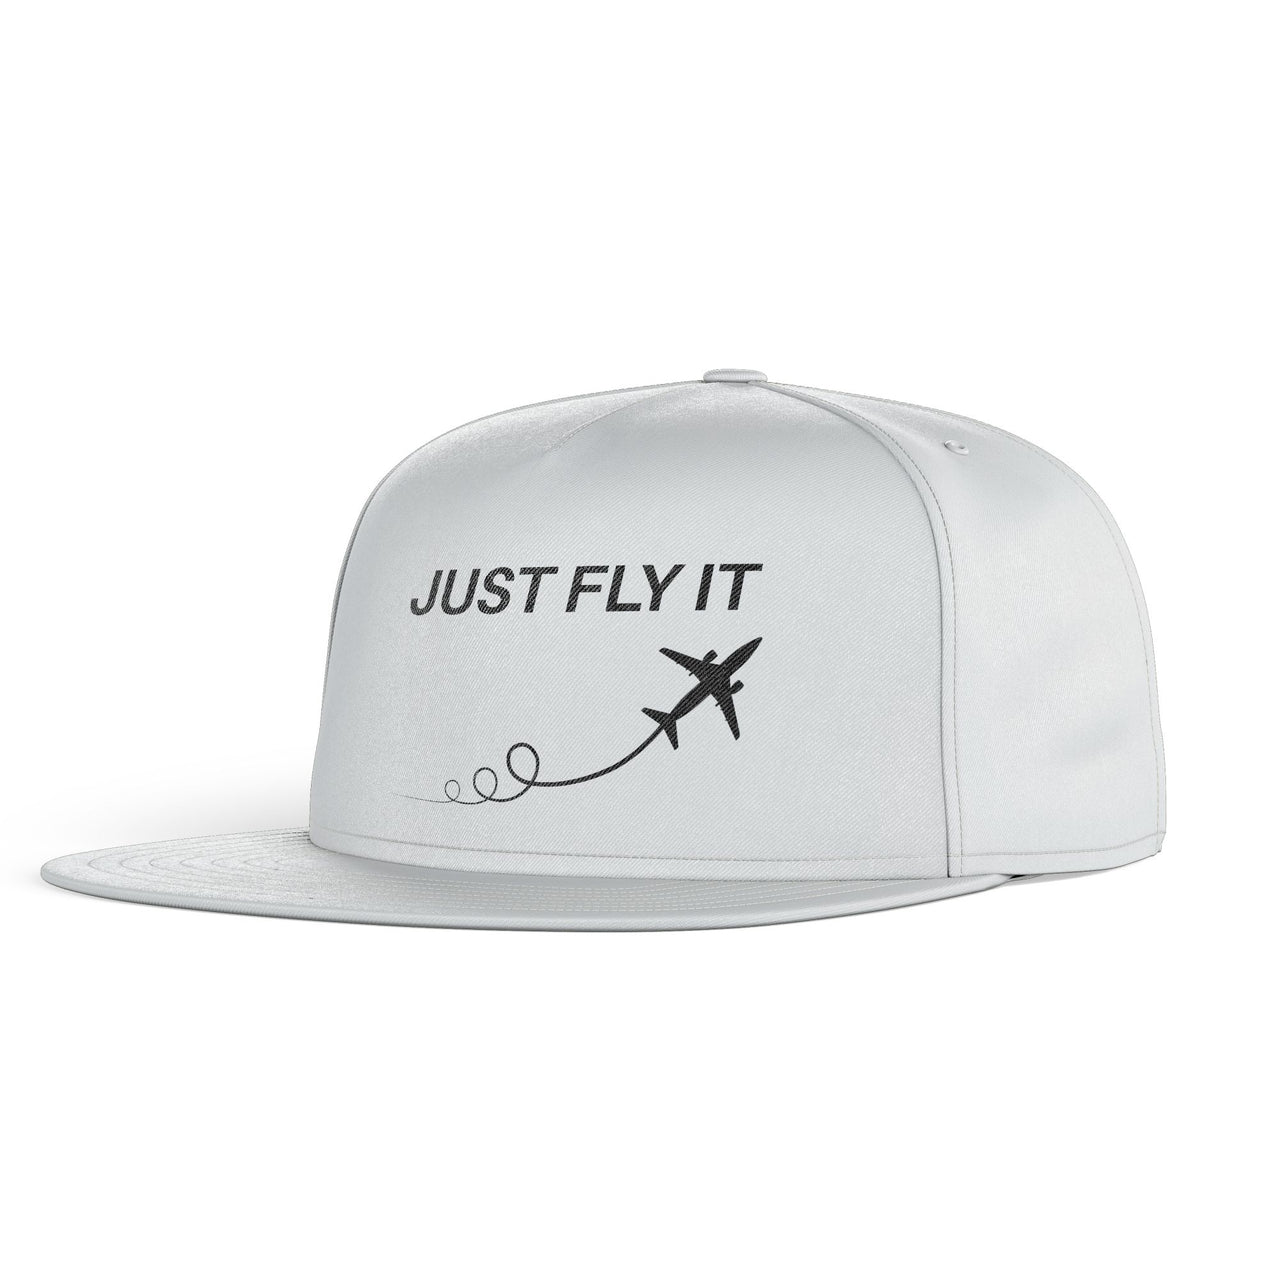 Just Fly It Designed Snapback Caps & Hats